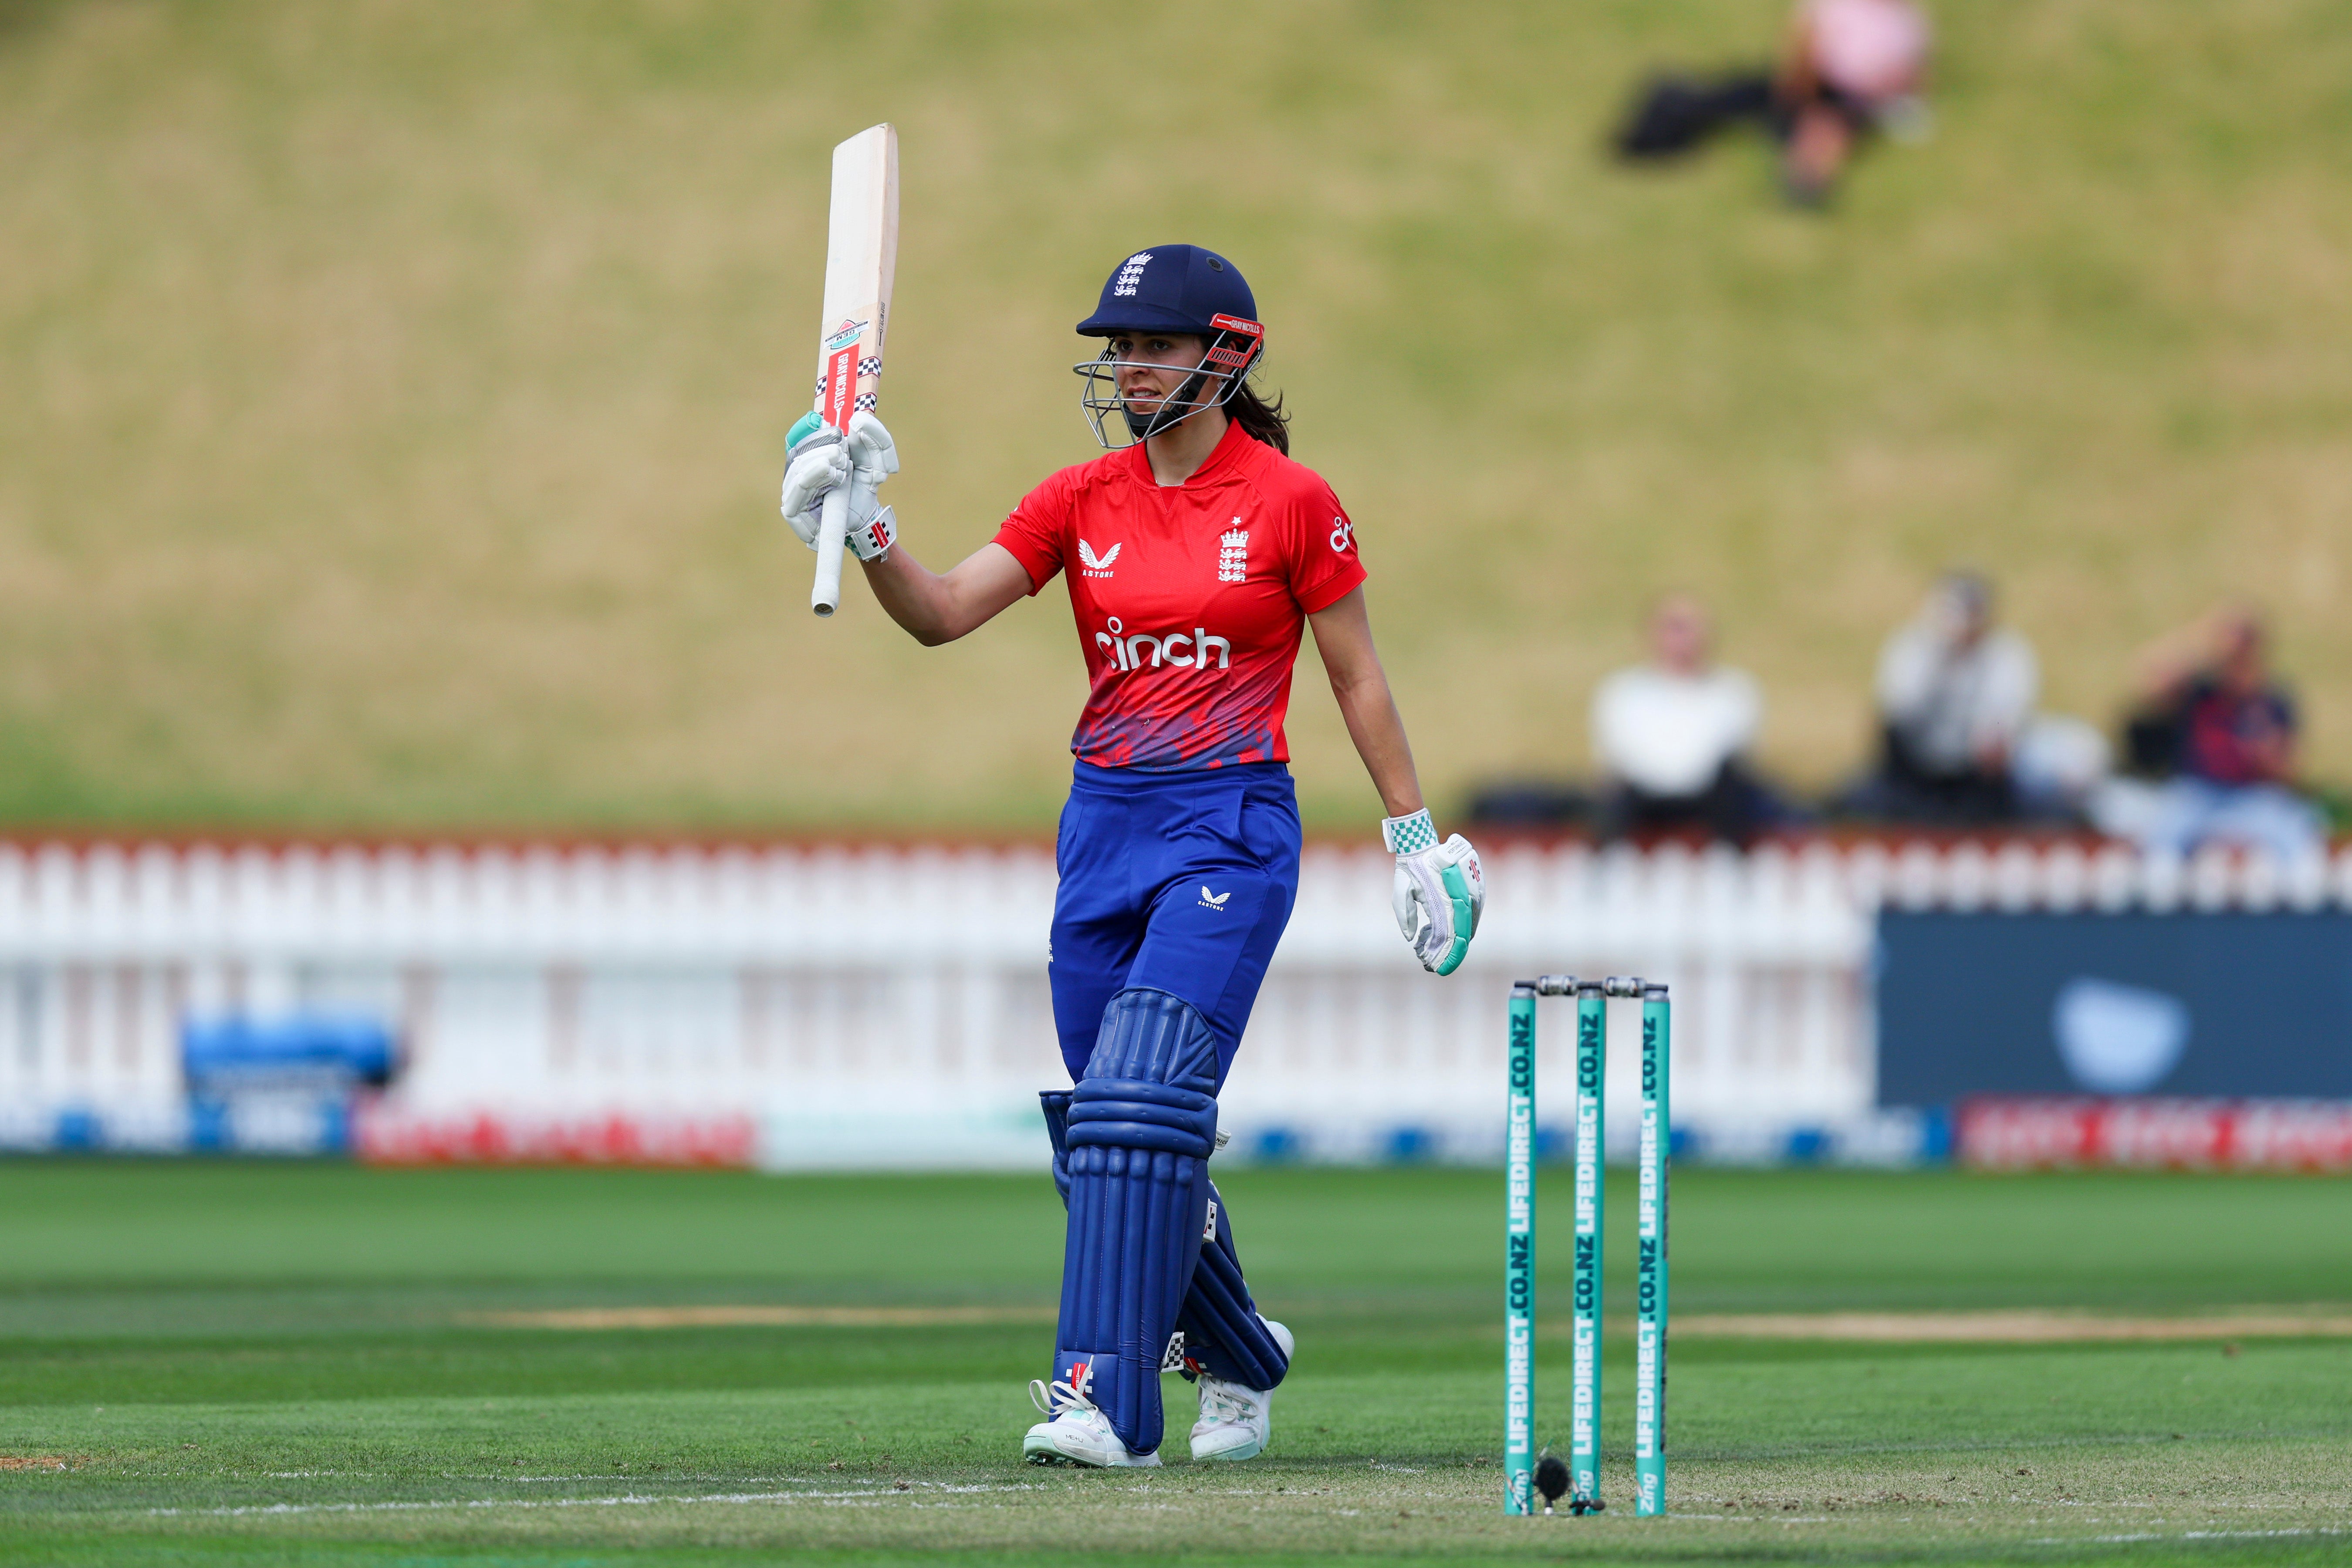 Bouchier scored her second consecutive half-century as England took an unassailable lead in the T20 series versus New Zealand